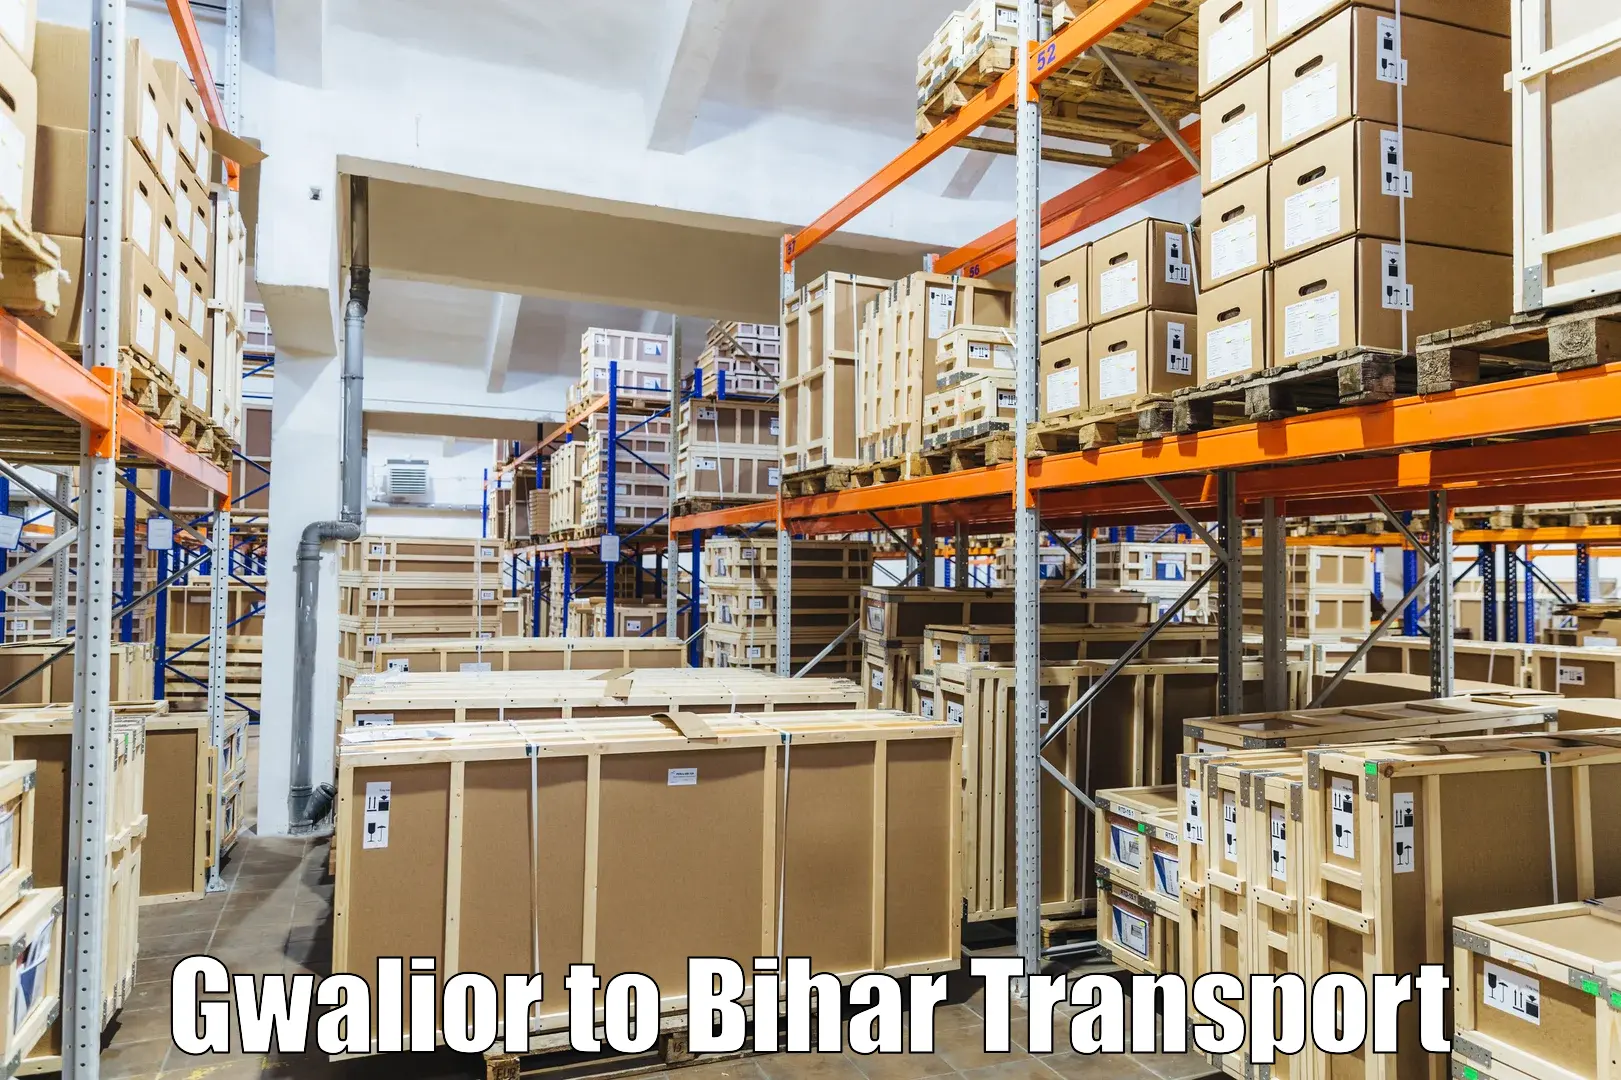 Daily parcel service transport Gwalior to Bihta